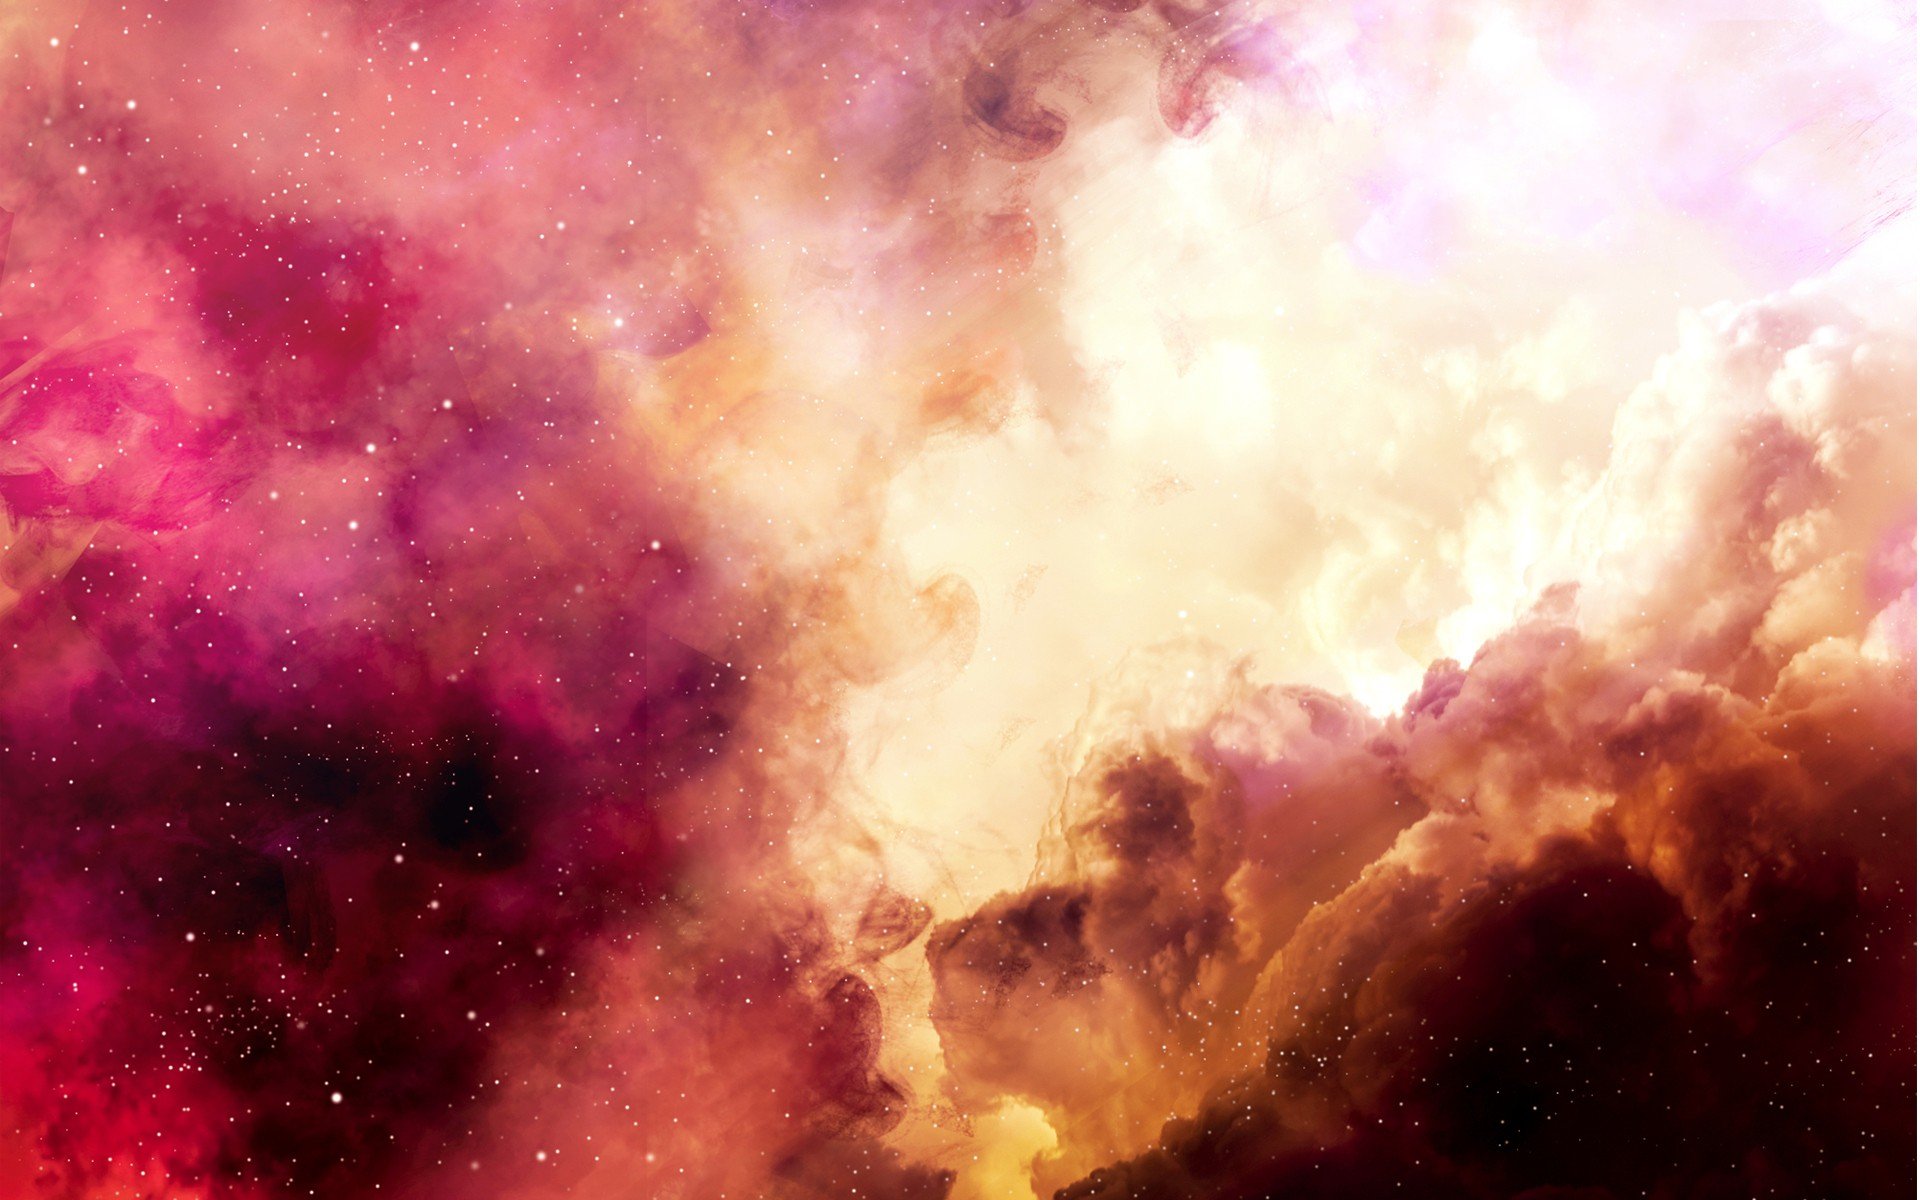 outer, Space, Supernova, Constellations Wallpaper